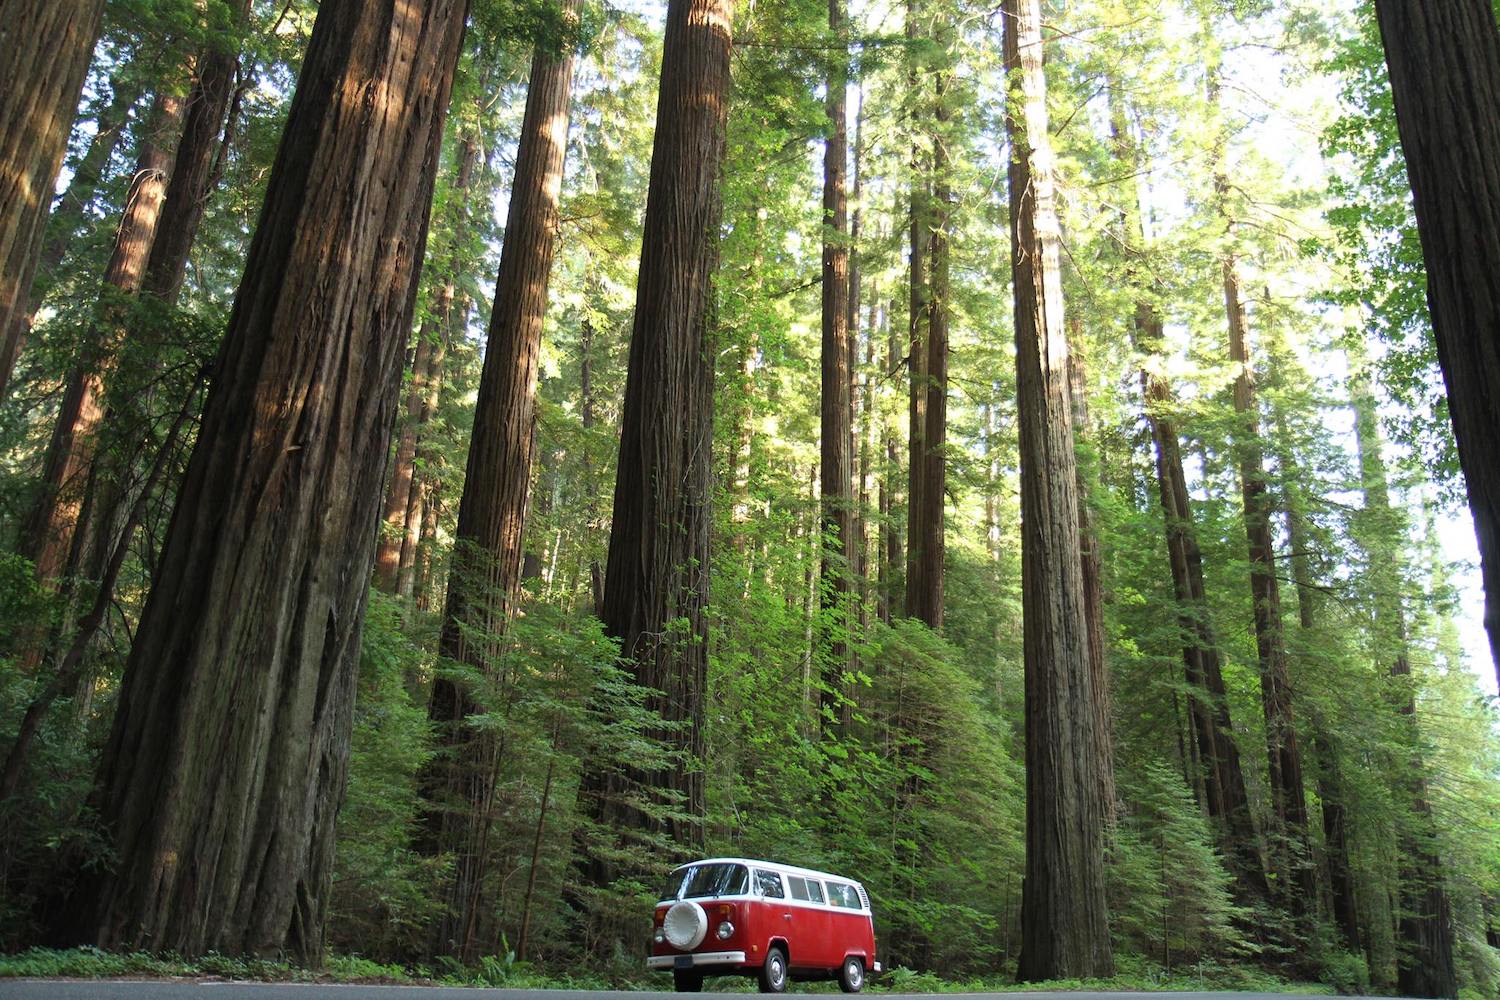 Tall trees and van in Redwood National Park